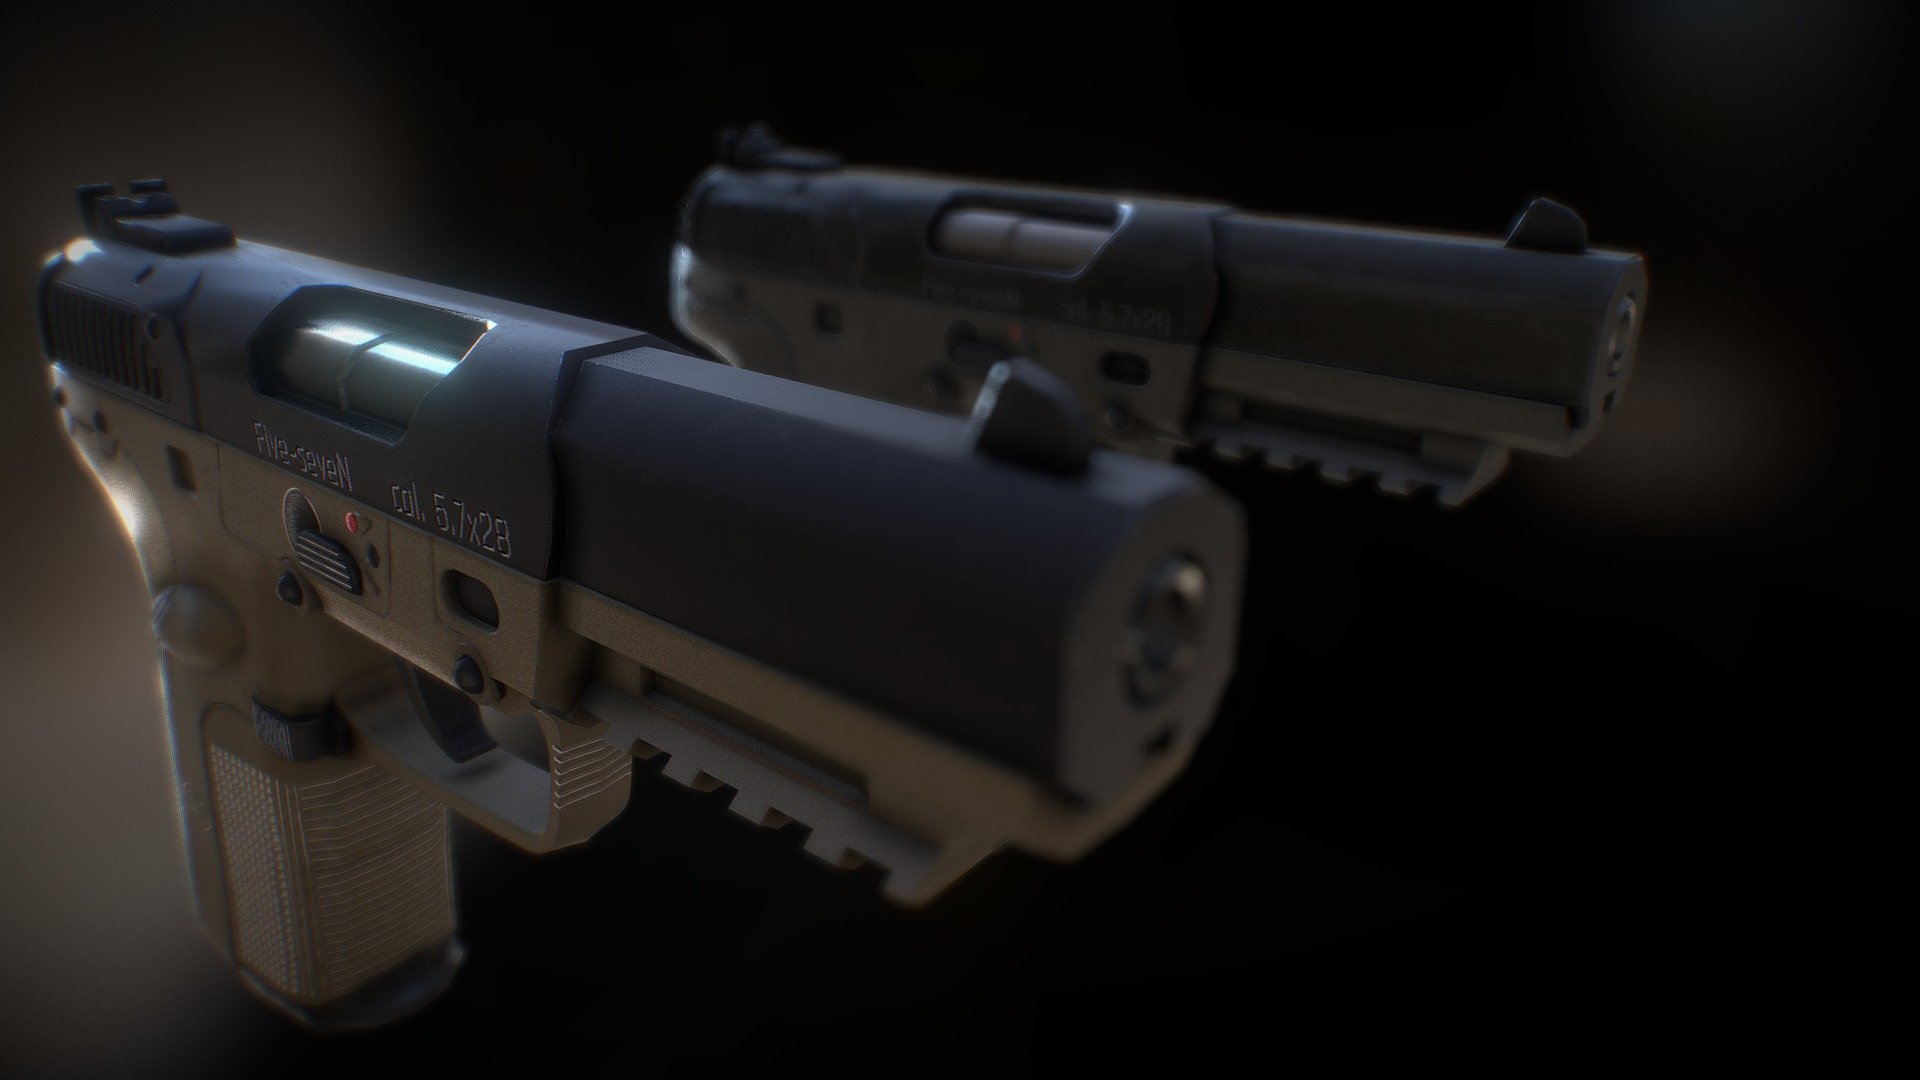 Low Poly Five Seven

Model contains 2 types of PBR materials, each of which is a single 4k texture set.

Can be used in games as well as render pictures.

Any format, models, including the original blend file are available on request.

On ArtStation: https://www.artstation.com/artwork/lxoaxz - Low Poly Five Seven - Buy Royalty Free 3D model by Andante (@AndanteOle) 3d model